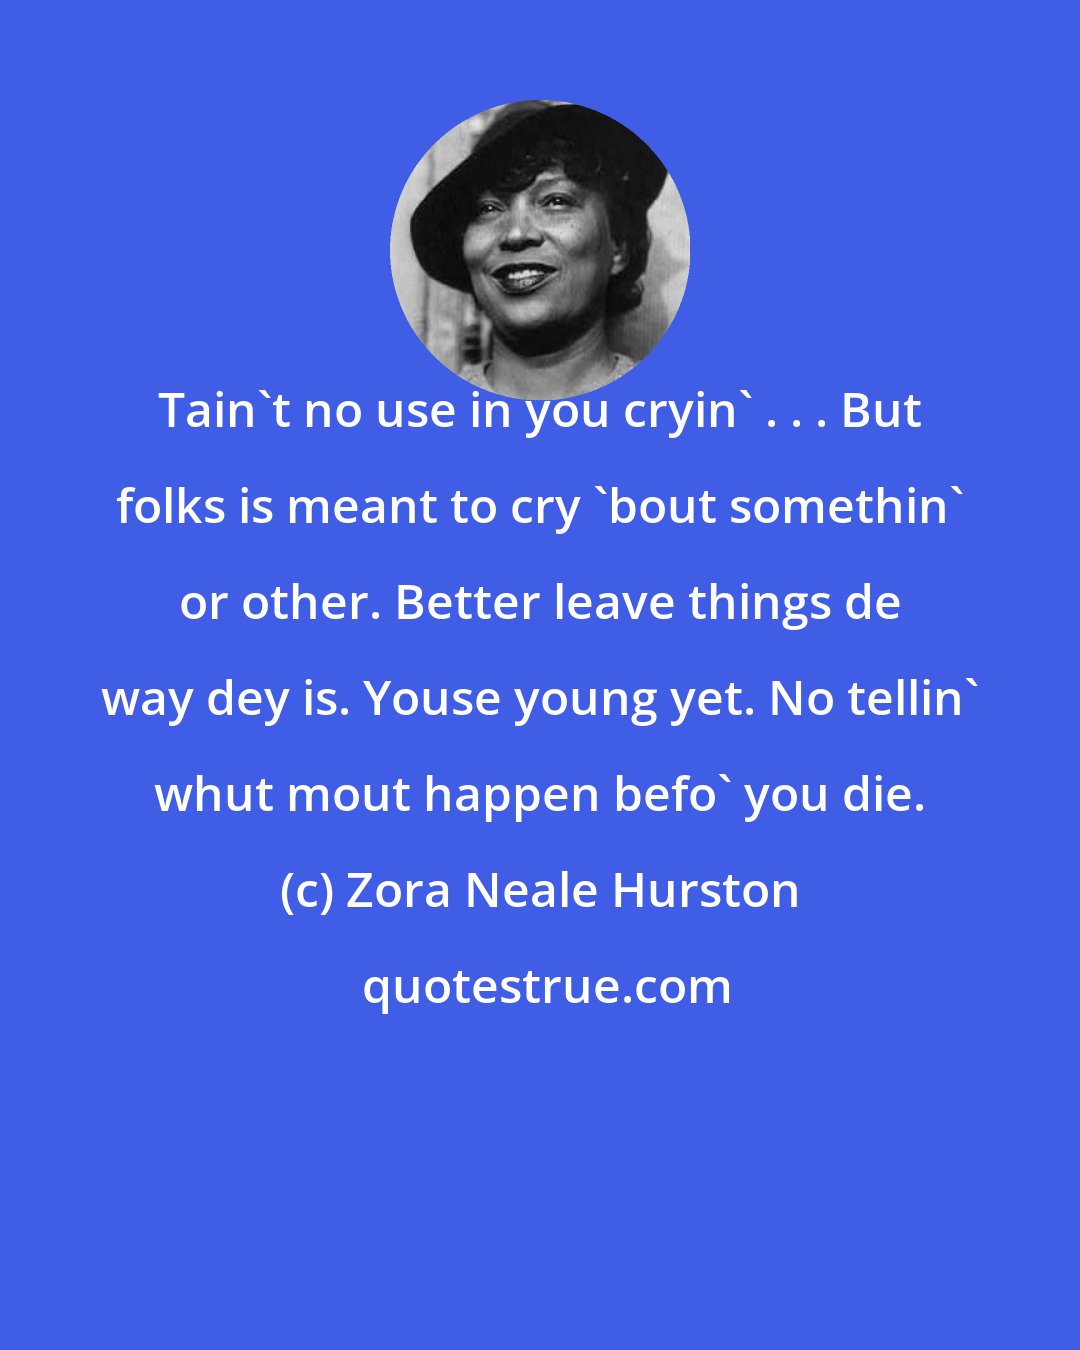 Zora Neale Hurston: Tain't no use in you cryin' . . . But folks is meant to cry 'bout somethin' or other. Better leave things de way dey is. Youse young yet. No tellin' whut mout happen befo' you die.